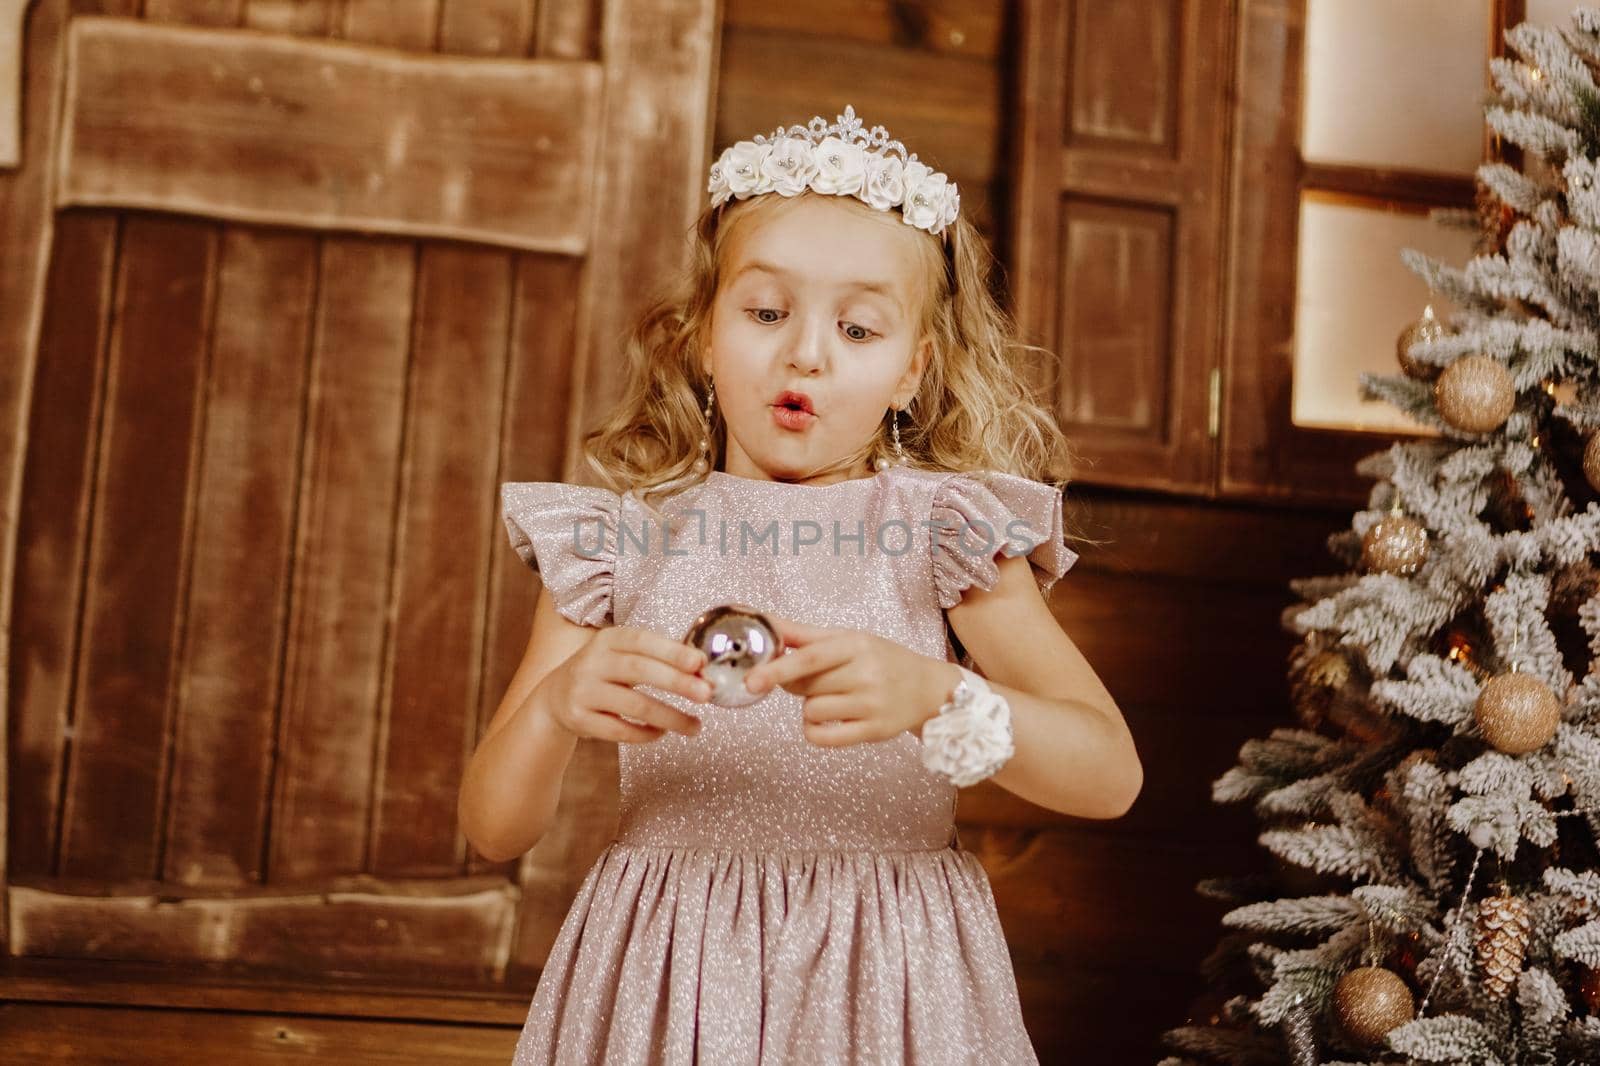 Little girl with blond hair in pink dress in new year background. Girl blue eyes near Christmas tree with ball in her hands.